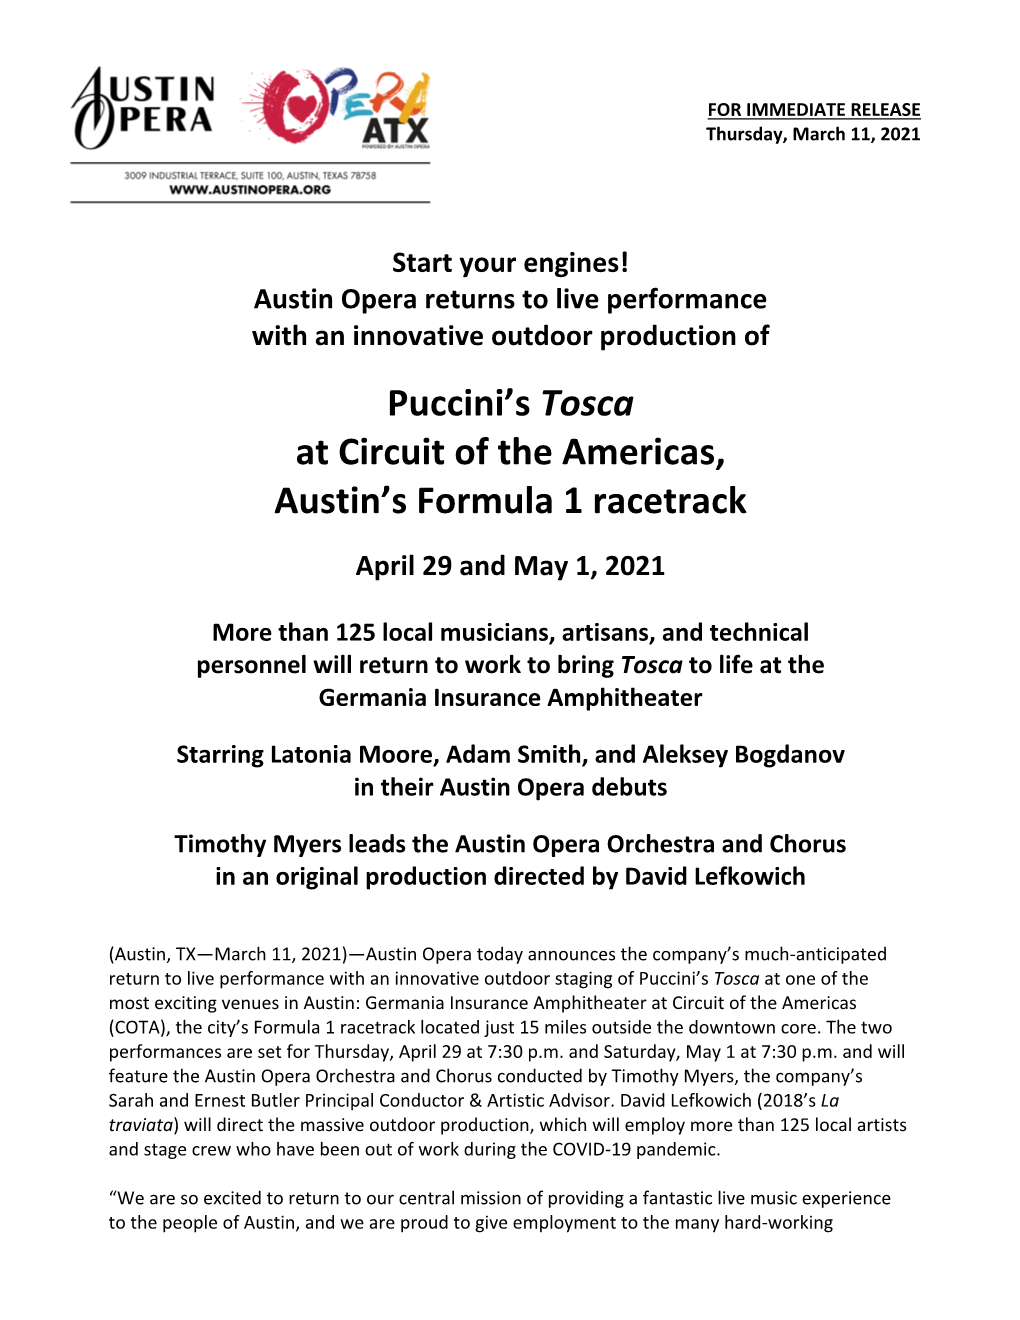 Puccini's Tosca at Circuit of the Americas, Austin's Formula 1